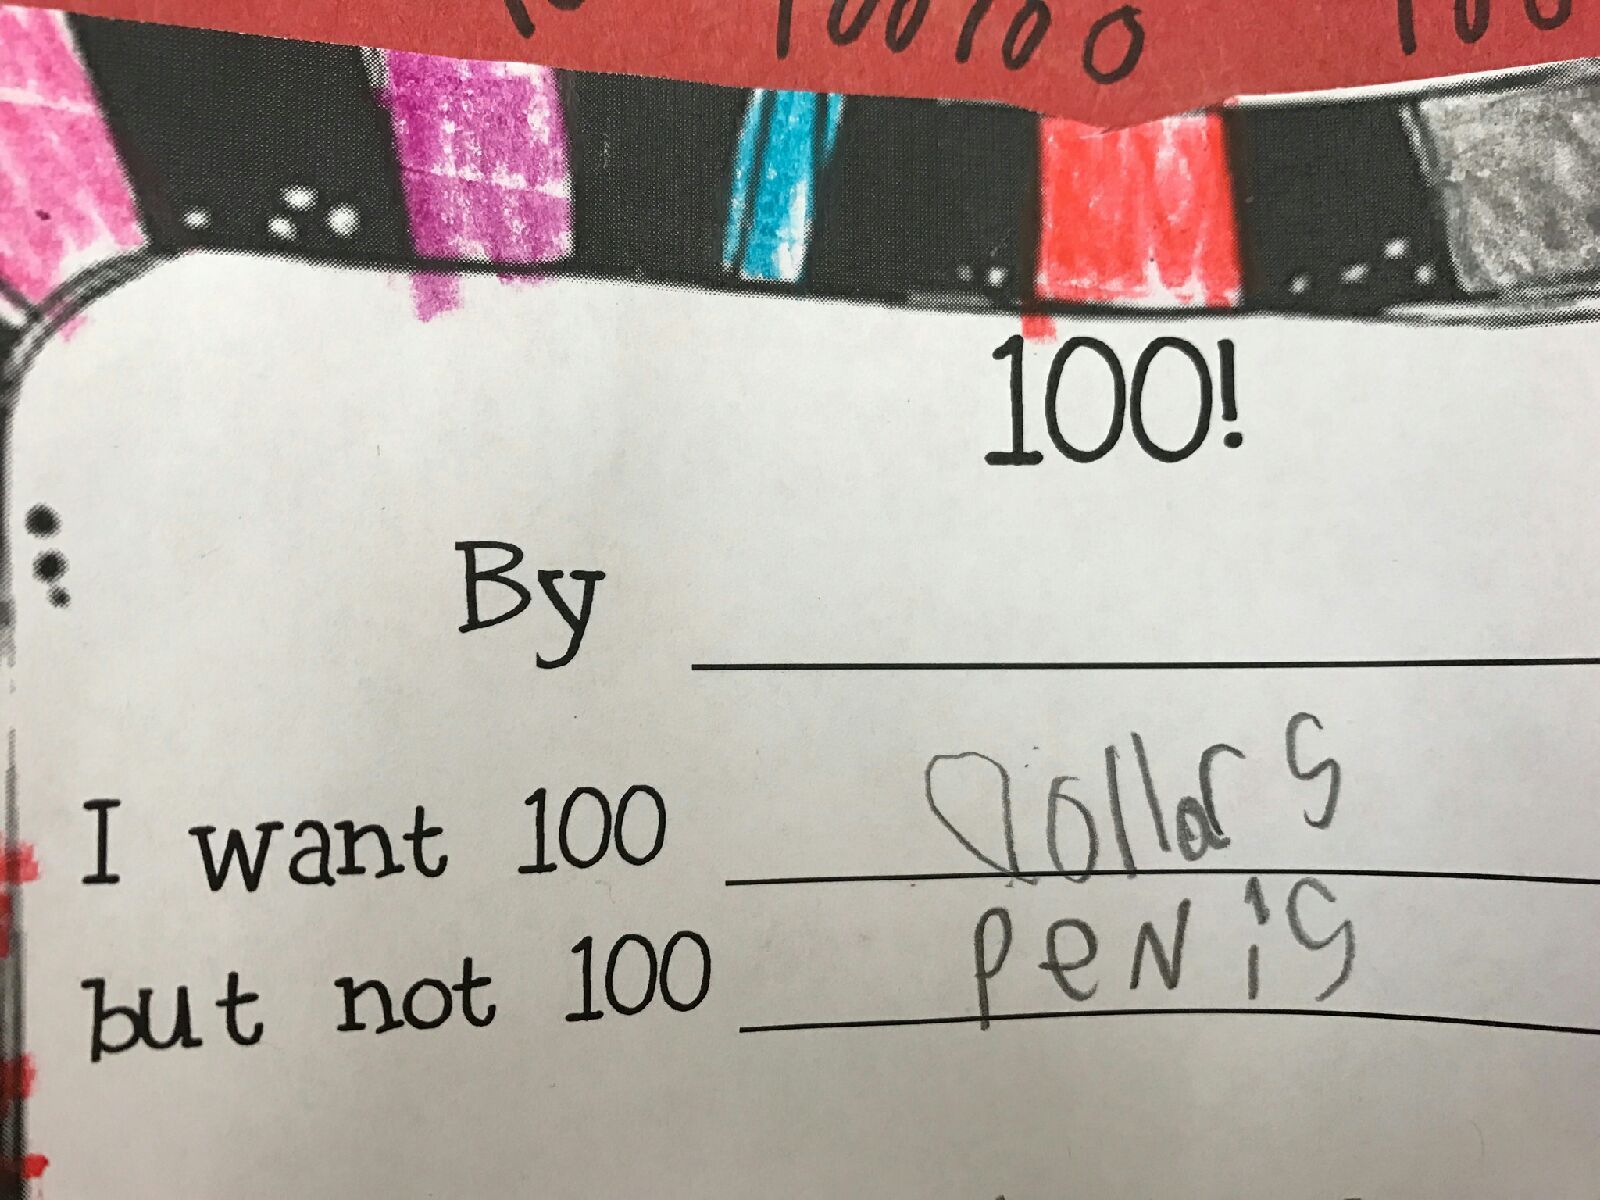 Only six years old and already setting goals.